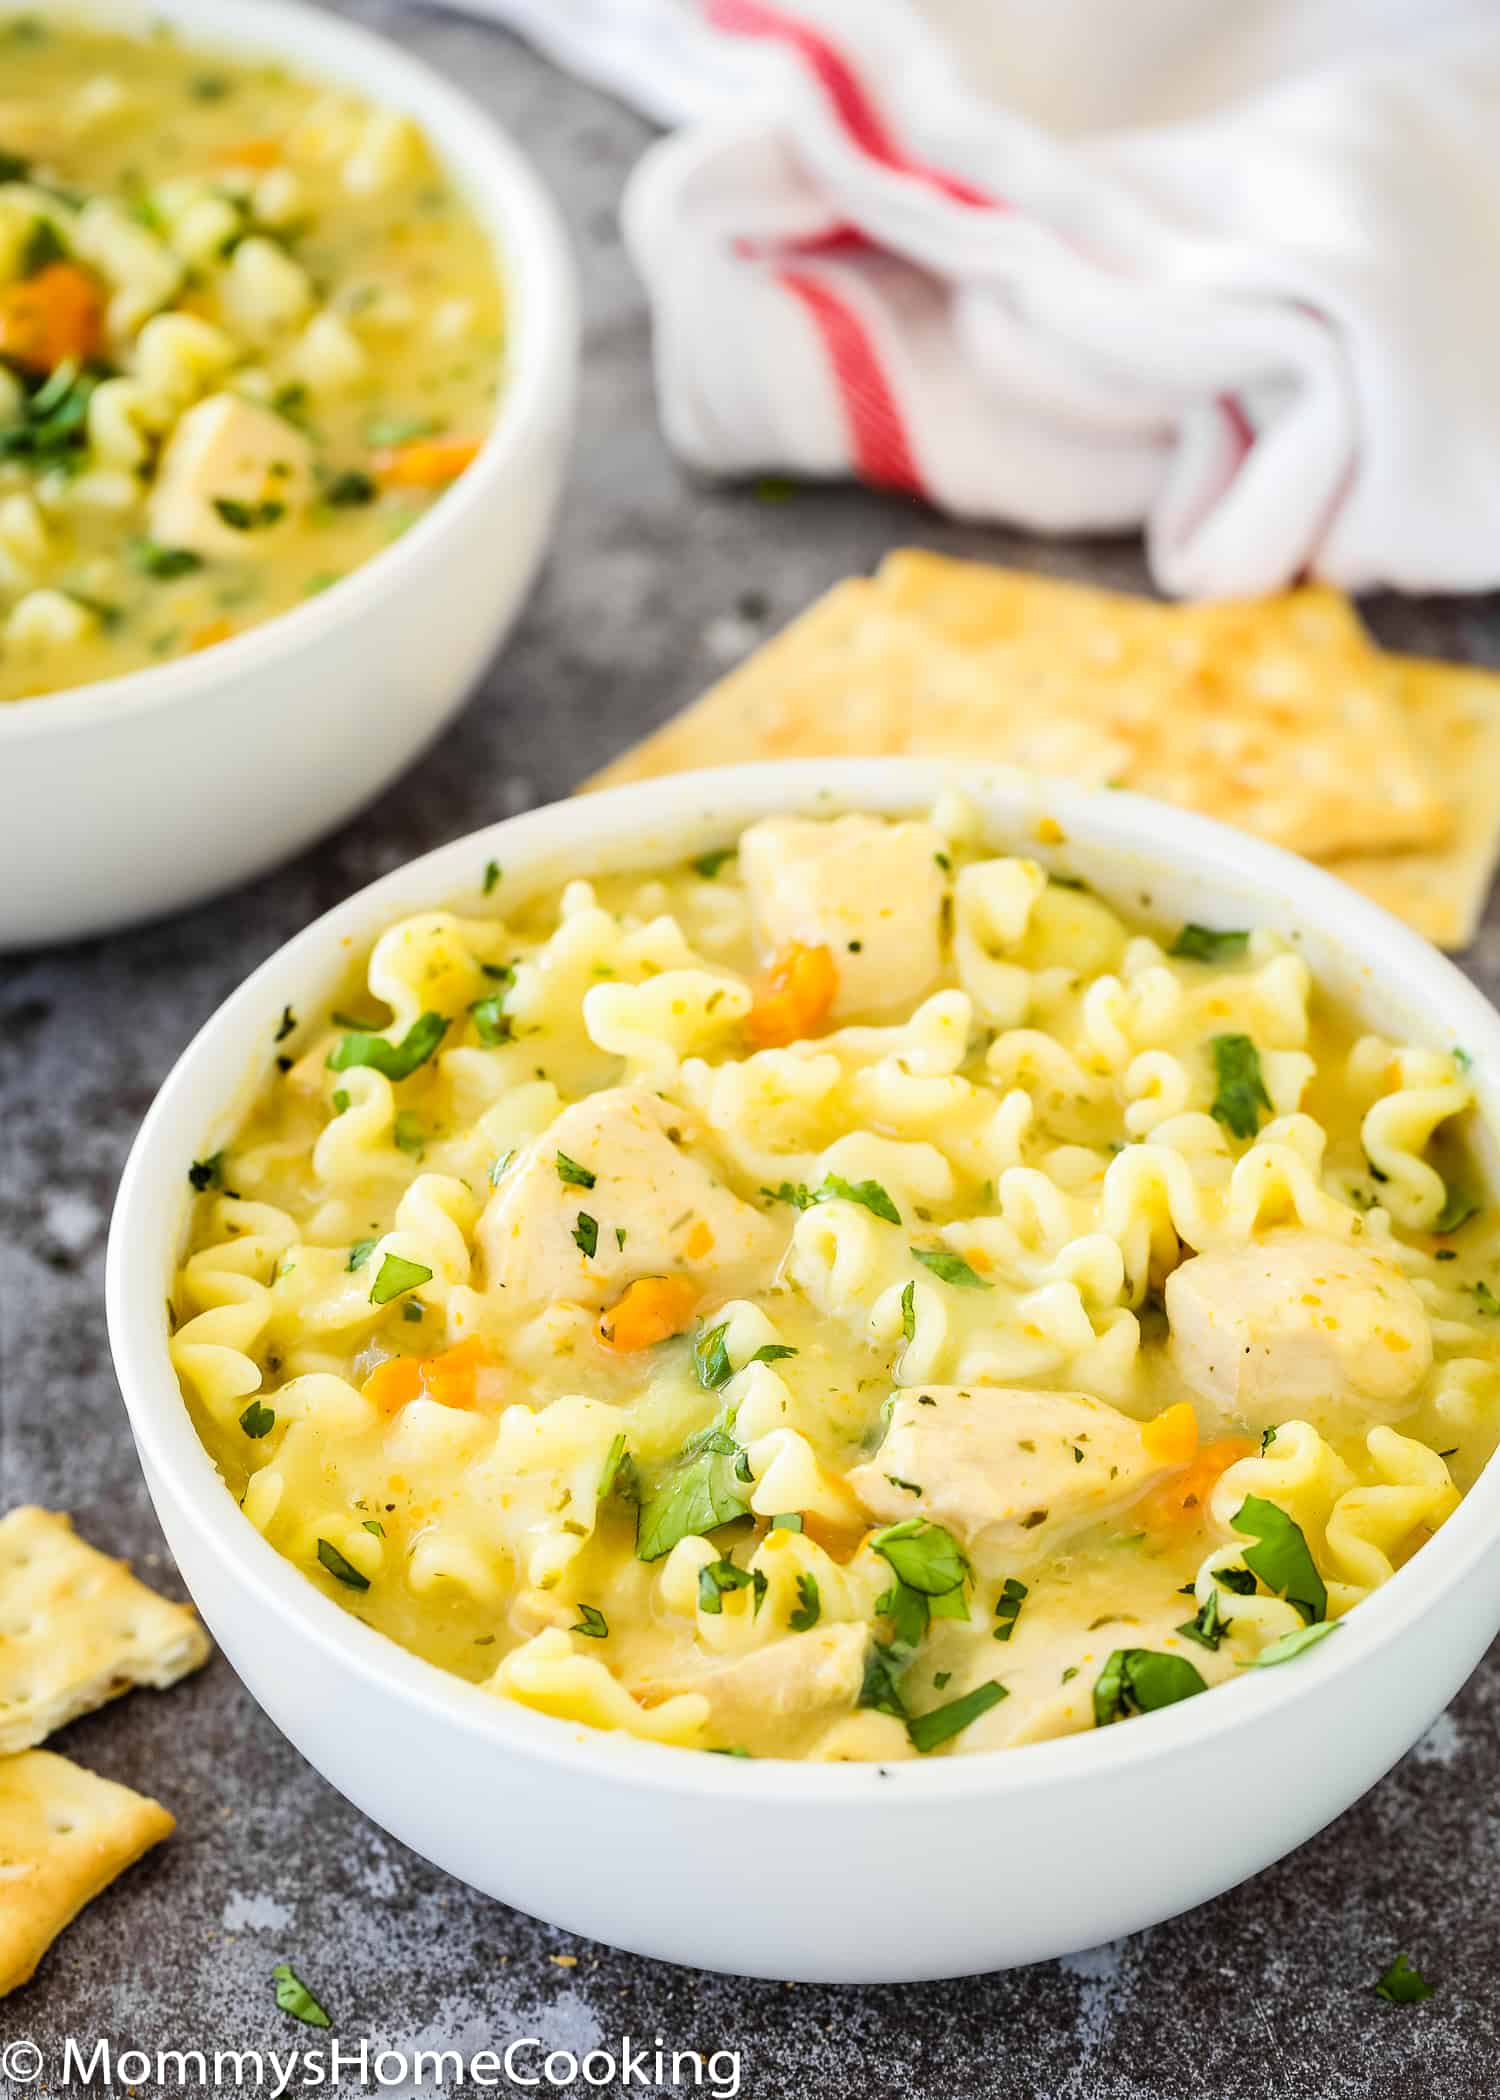 Instant Pot Creamy Chicken Noodle Soup Recipe | Mommy's Home Cooking